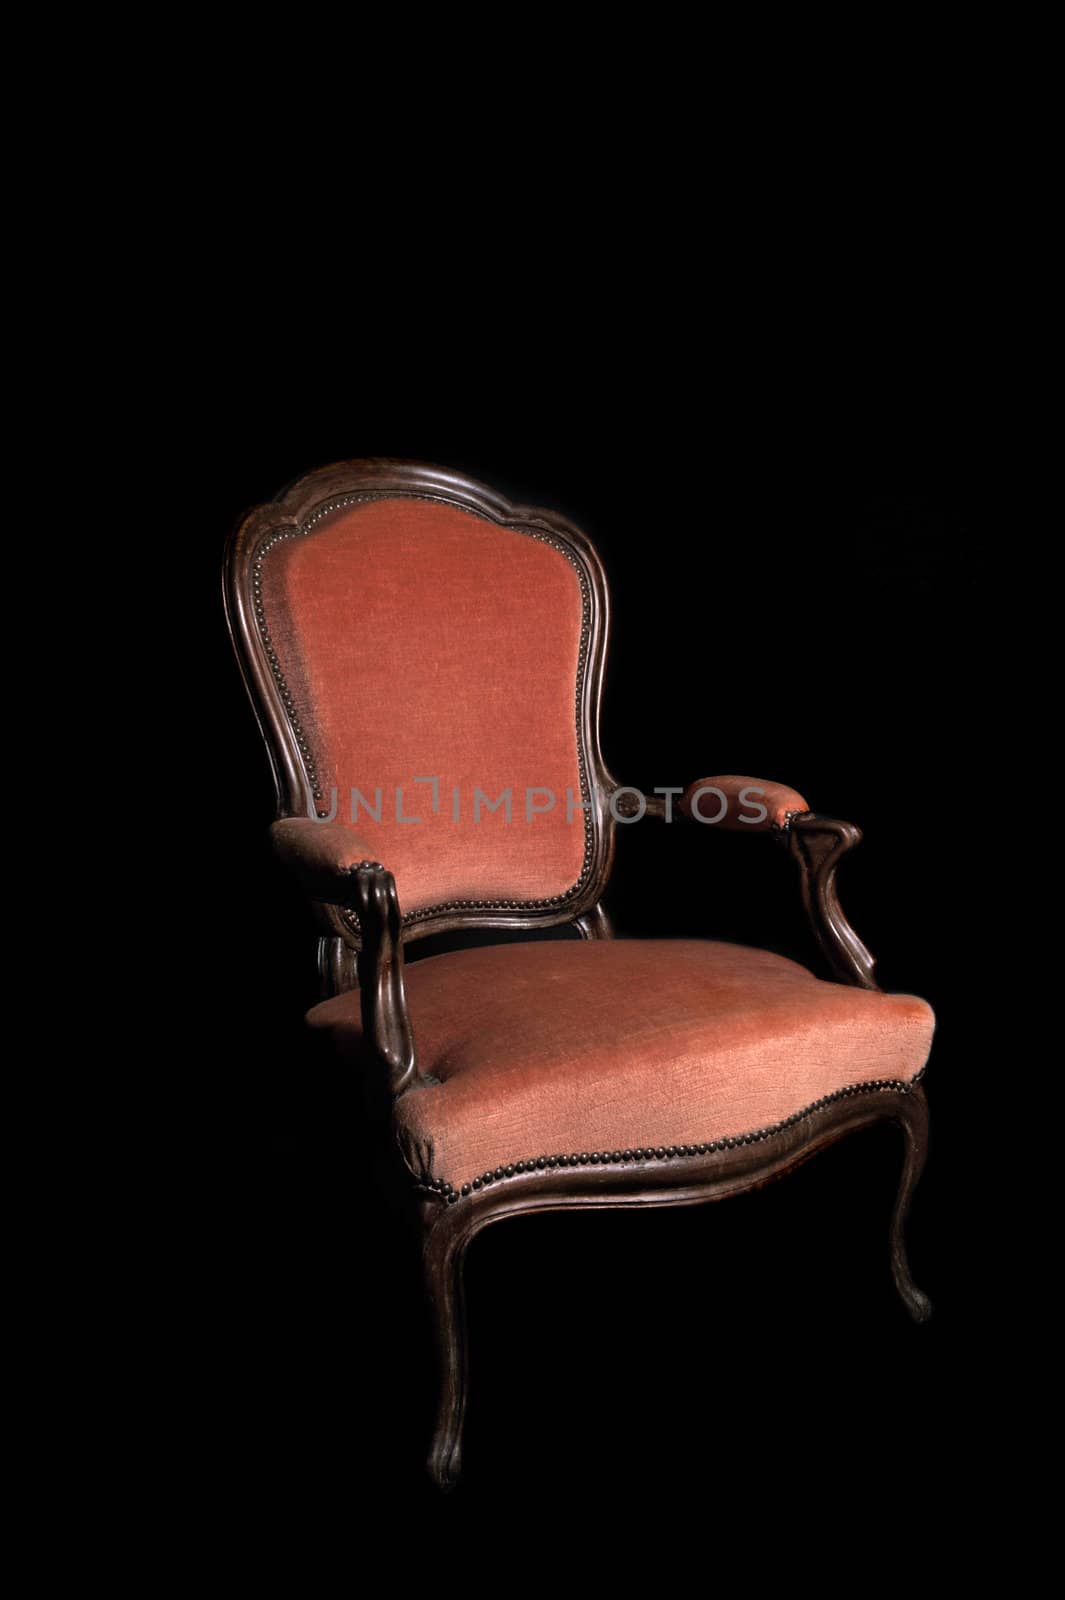 antique red armchair on a black background